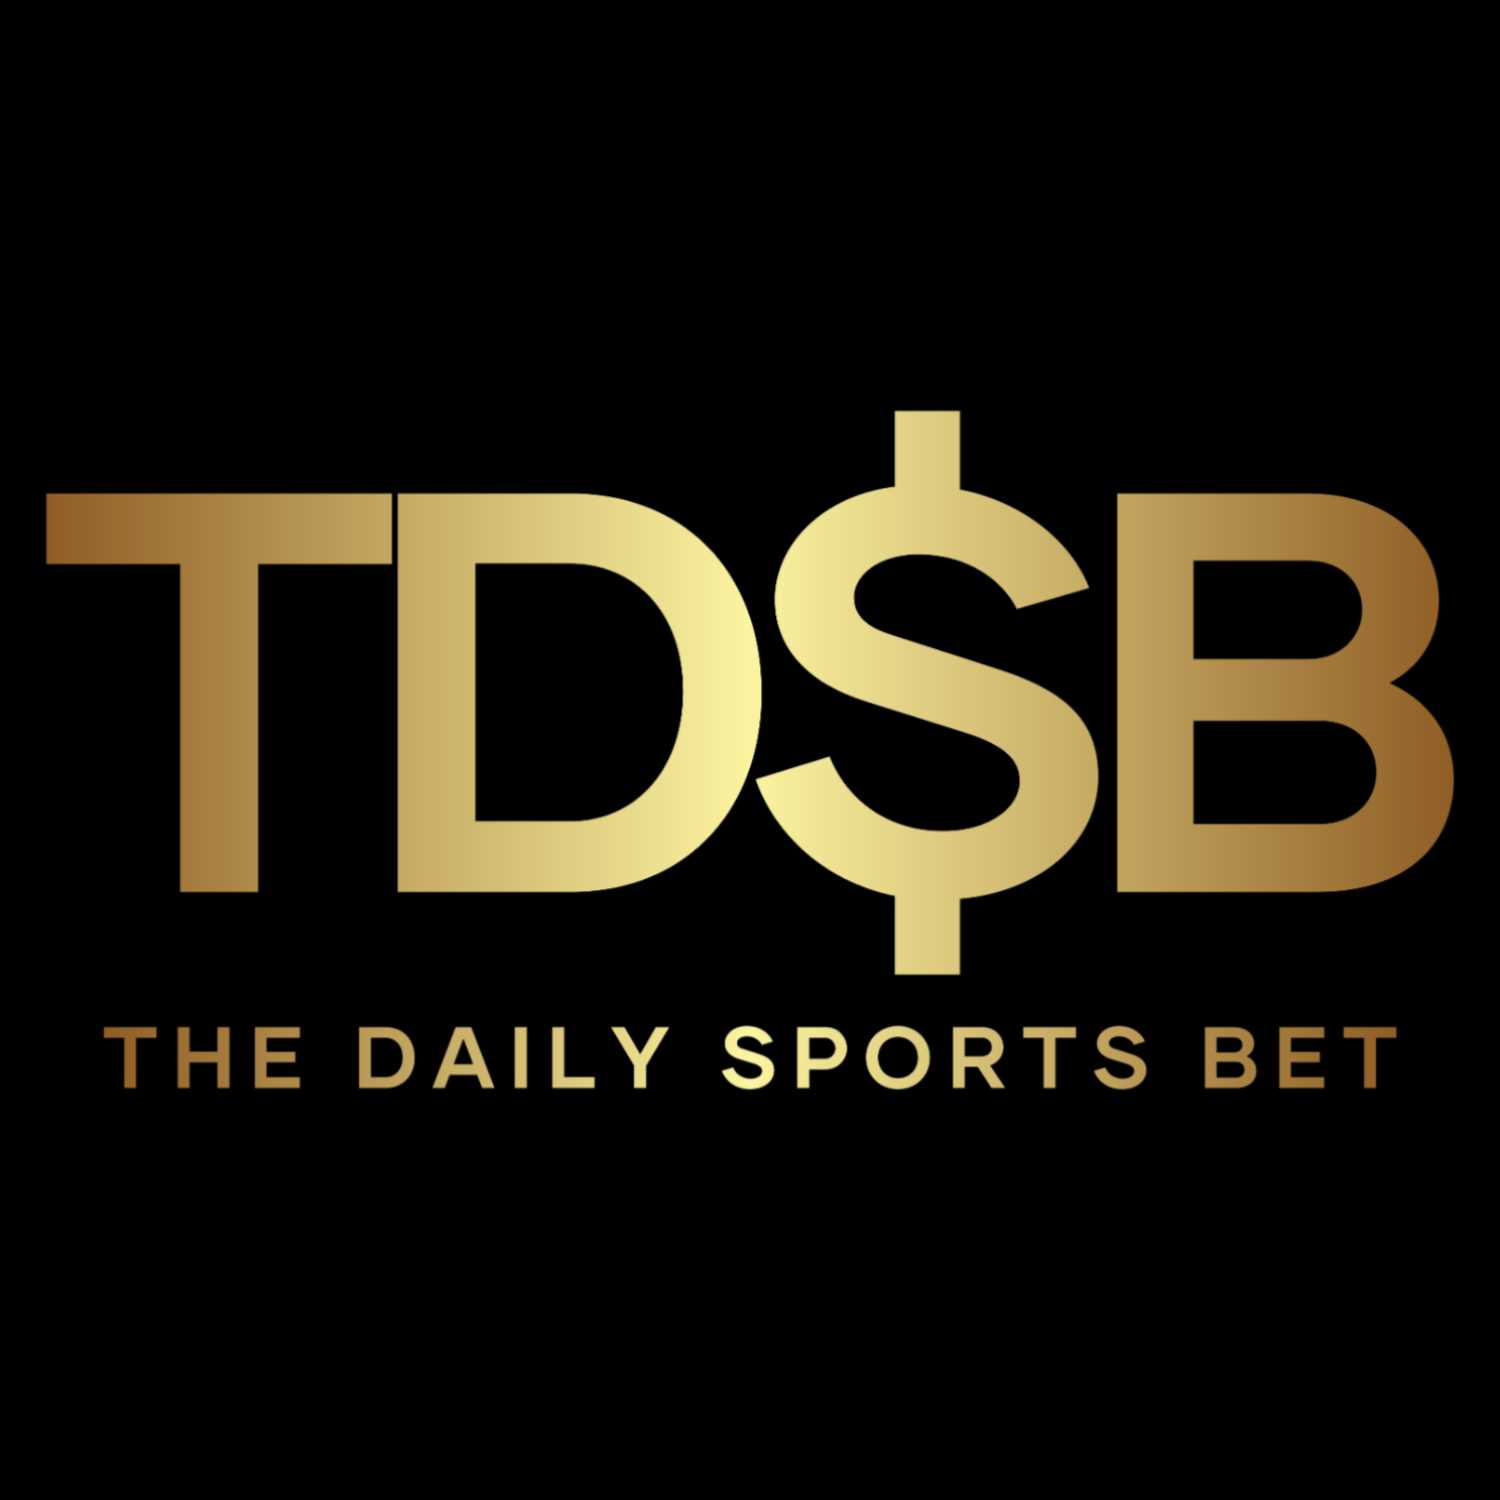 The Daily Sports Bet